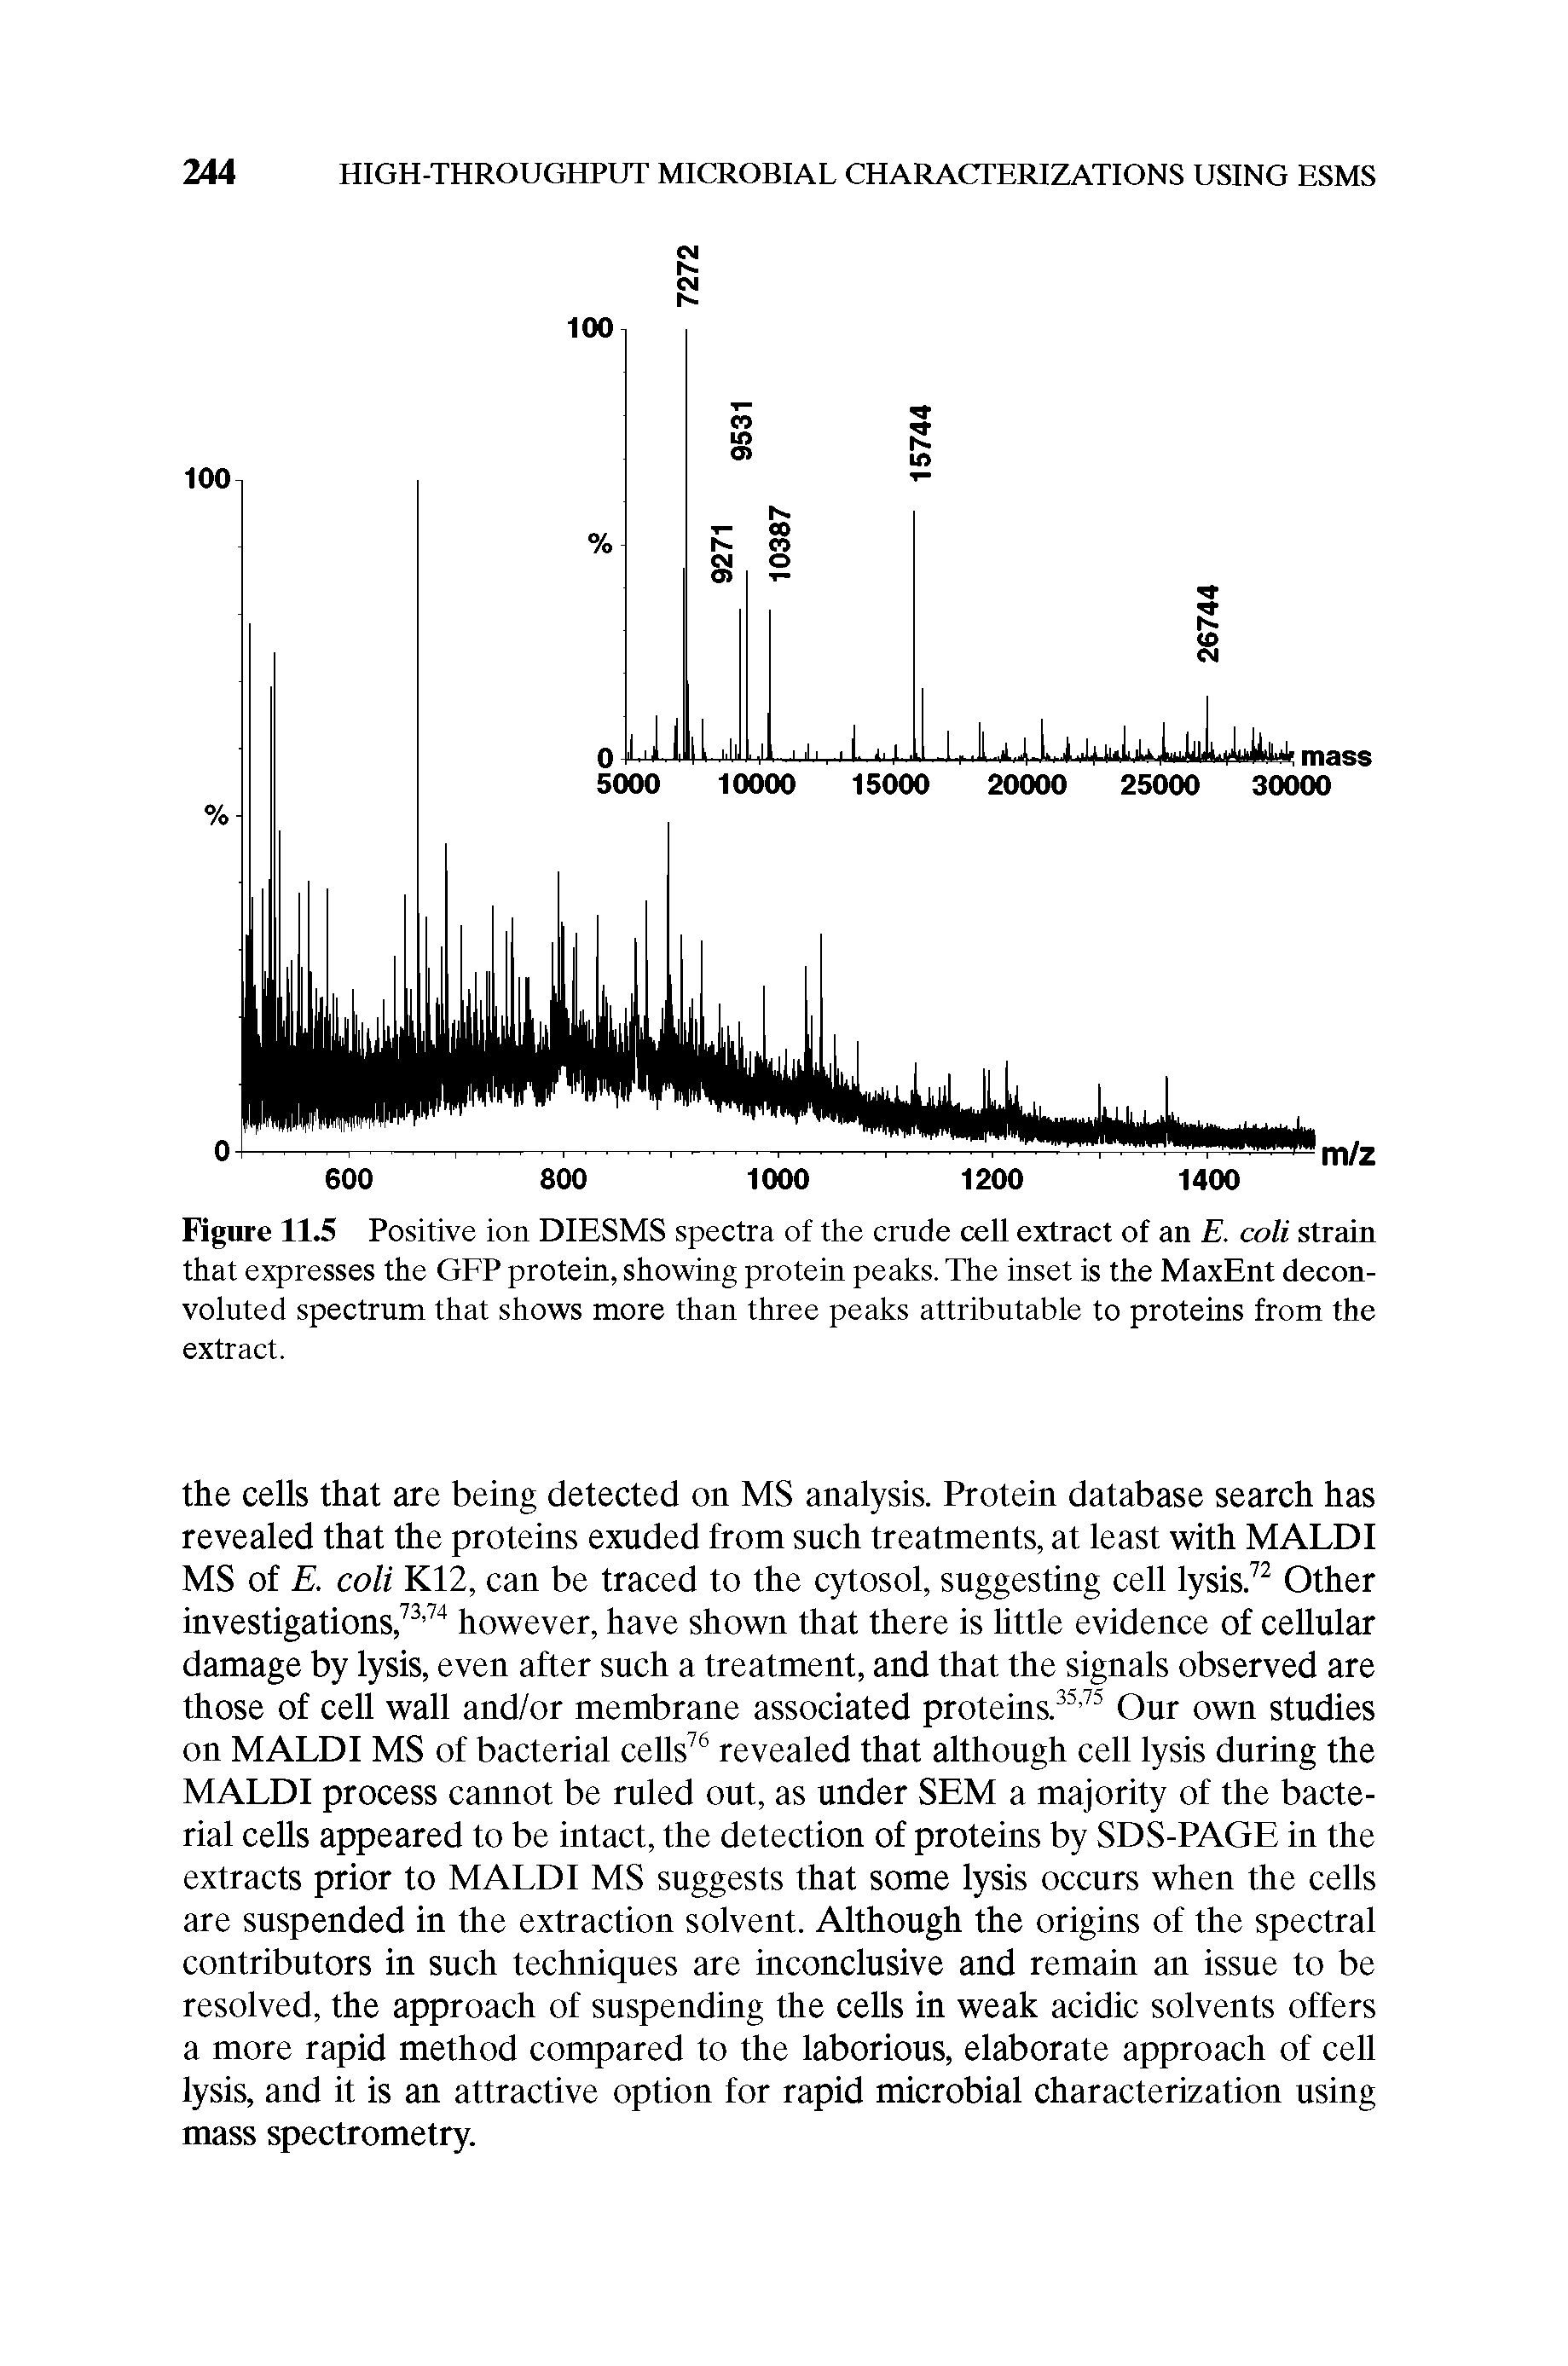 Figure 11.5 Positive ion DIESMS spectra of the crude cell extract of an E. coli strain that expresses the GFP protein, showing protein peaks. The inset is the MaxEnt decon-voluted spectrum that shows more than three peaks attributable to proteins from the extract.